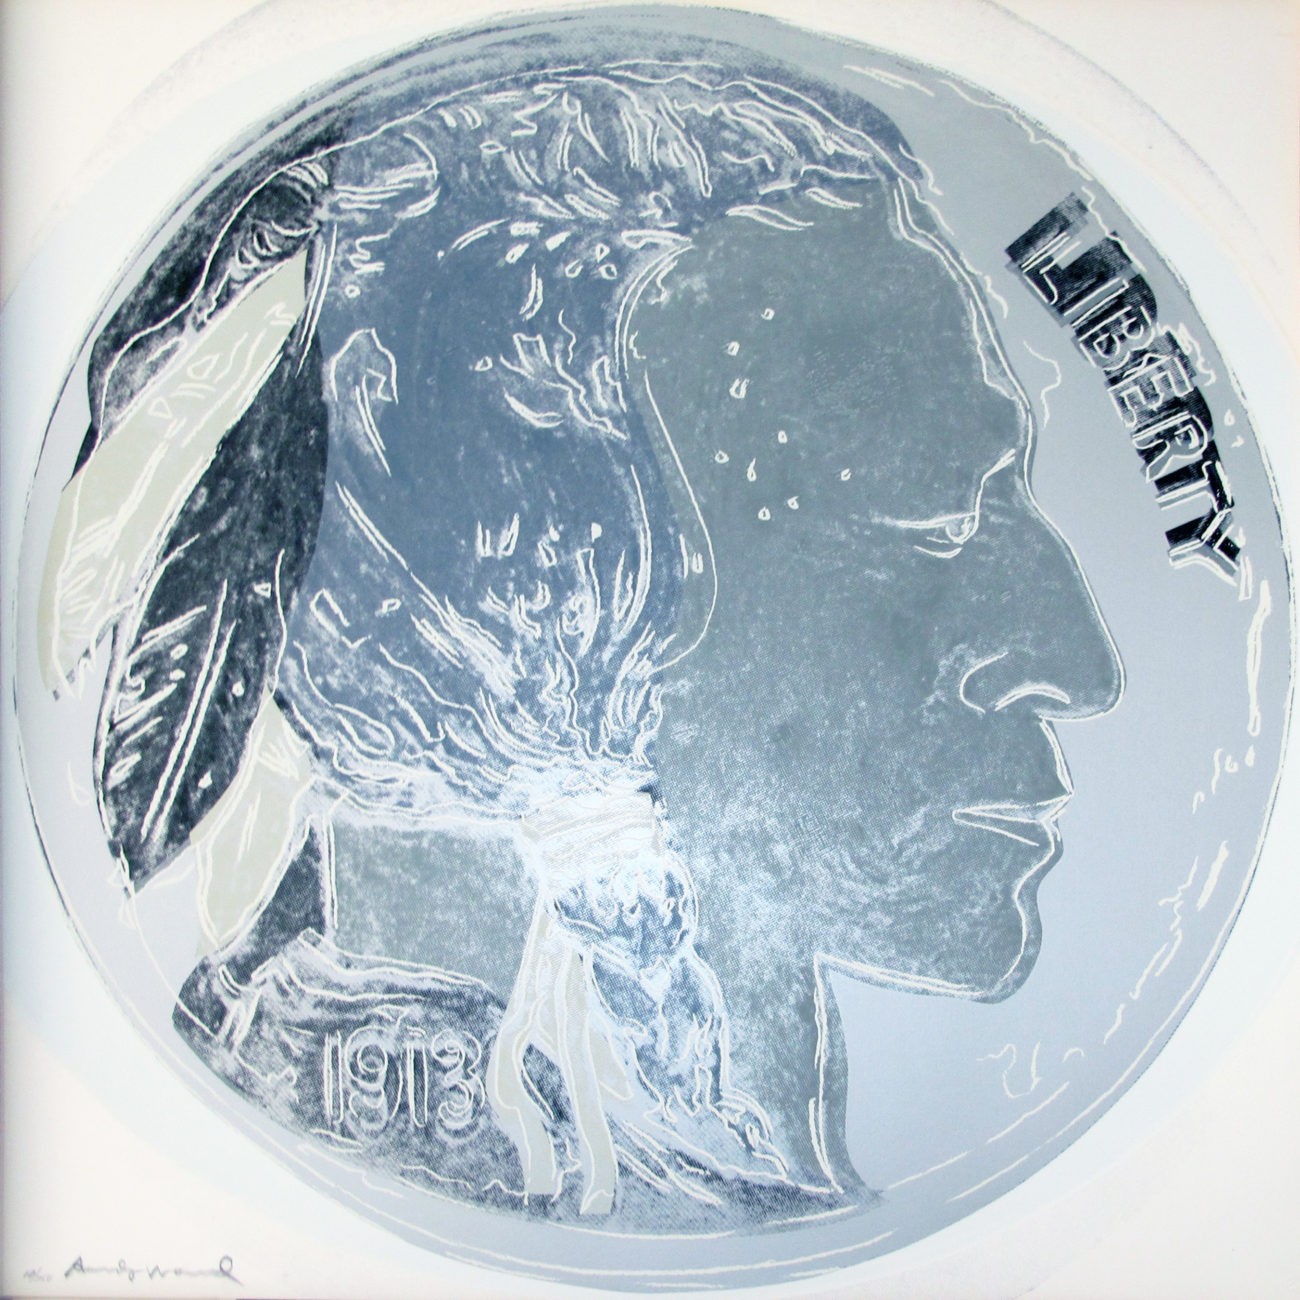 Andy Warhol | Cowboys and Indians | Indian Head Nickel 385 | 1986 | Image of Artists' work.